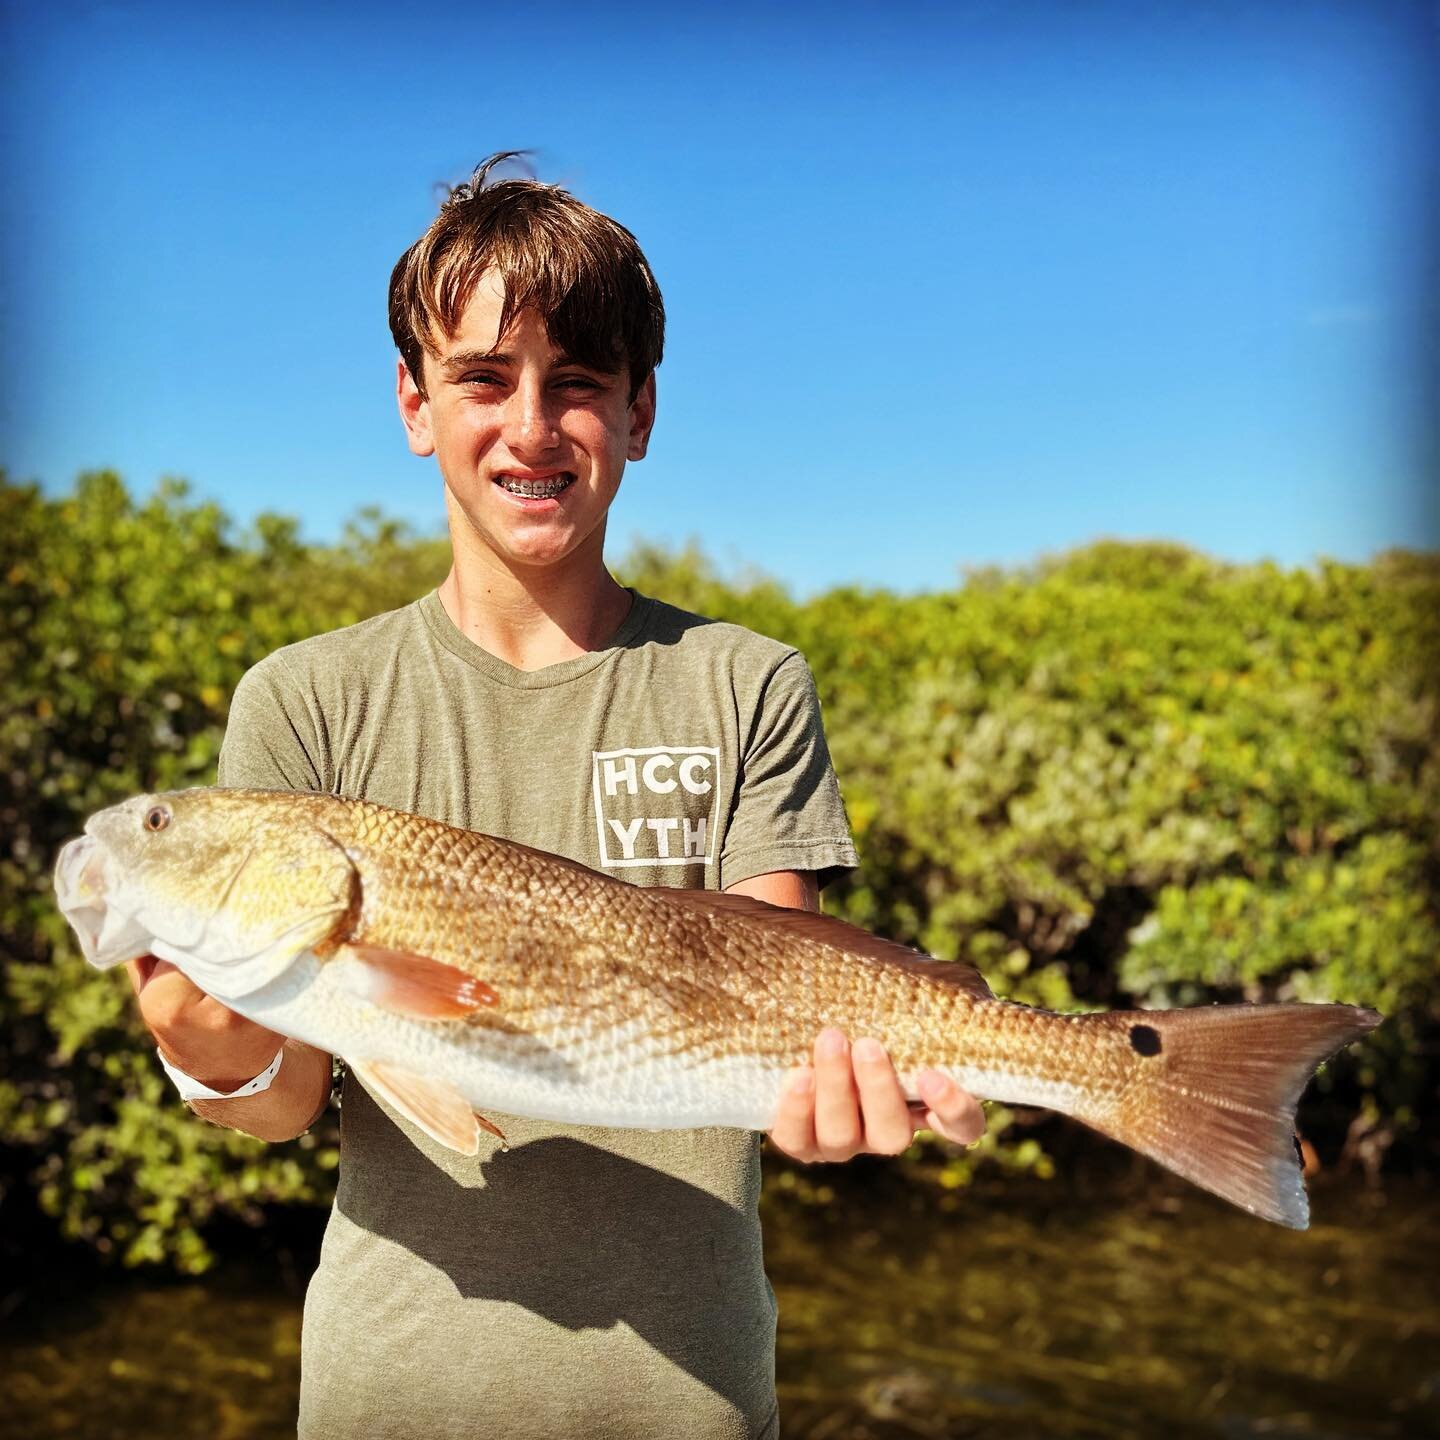 Nate with a big red this afternoon. The bite continues to good on the inside #crystalriver #captjameskerr
#crystalriverflatsfishing #fishing #naturecoast #seatrout #snook  #visitflorida #sodiumfishinggear #crystalriverfishing #inshorefishing #redfish